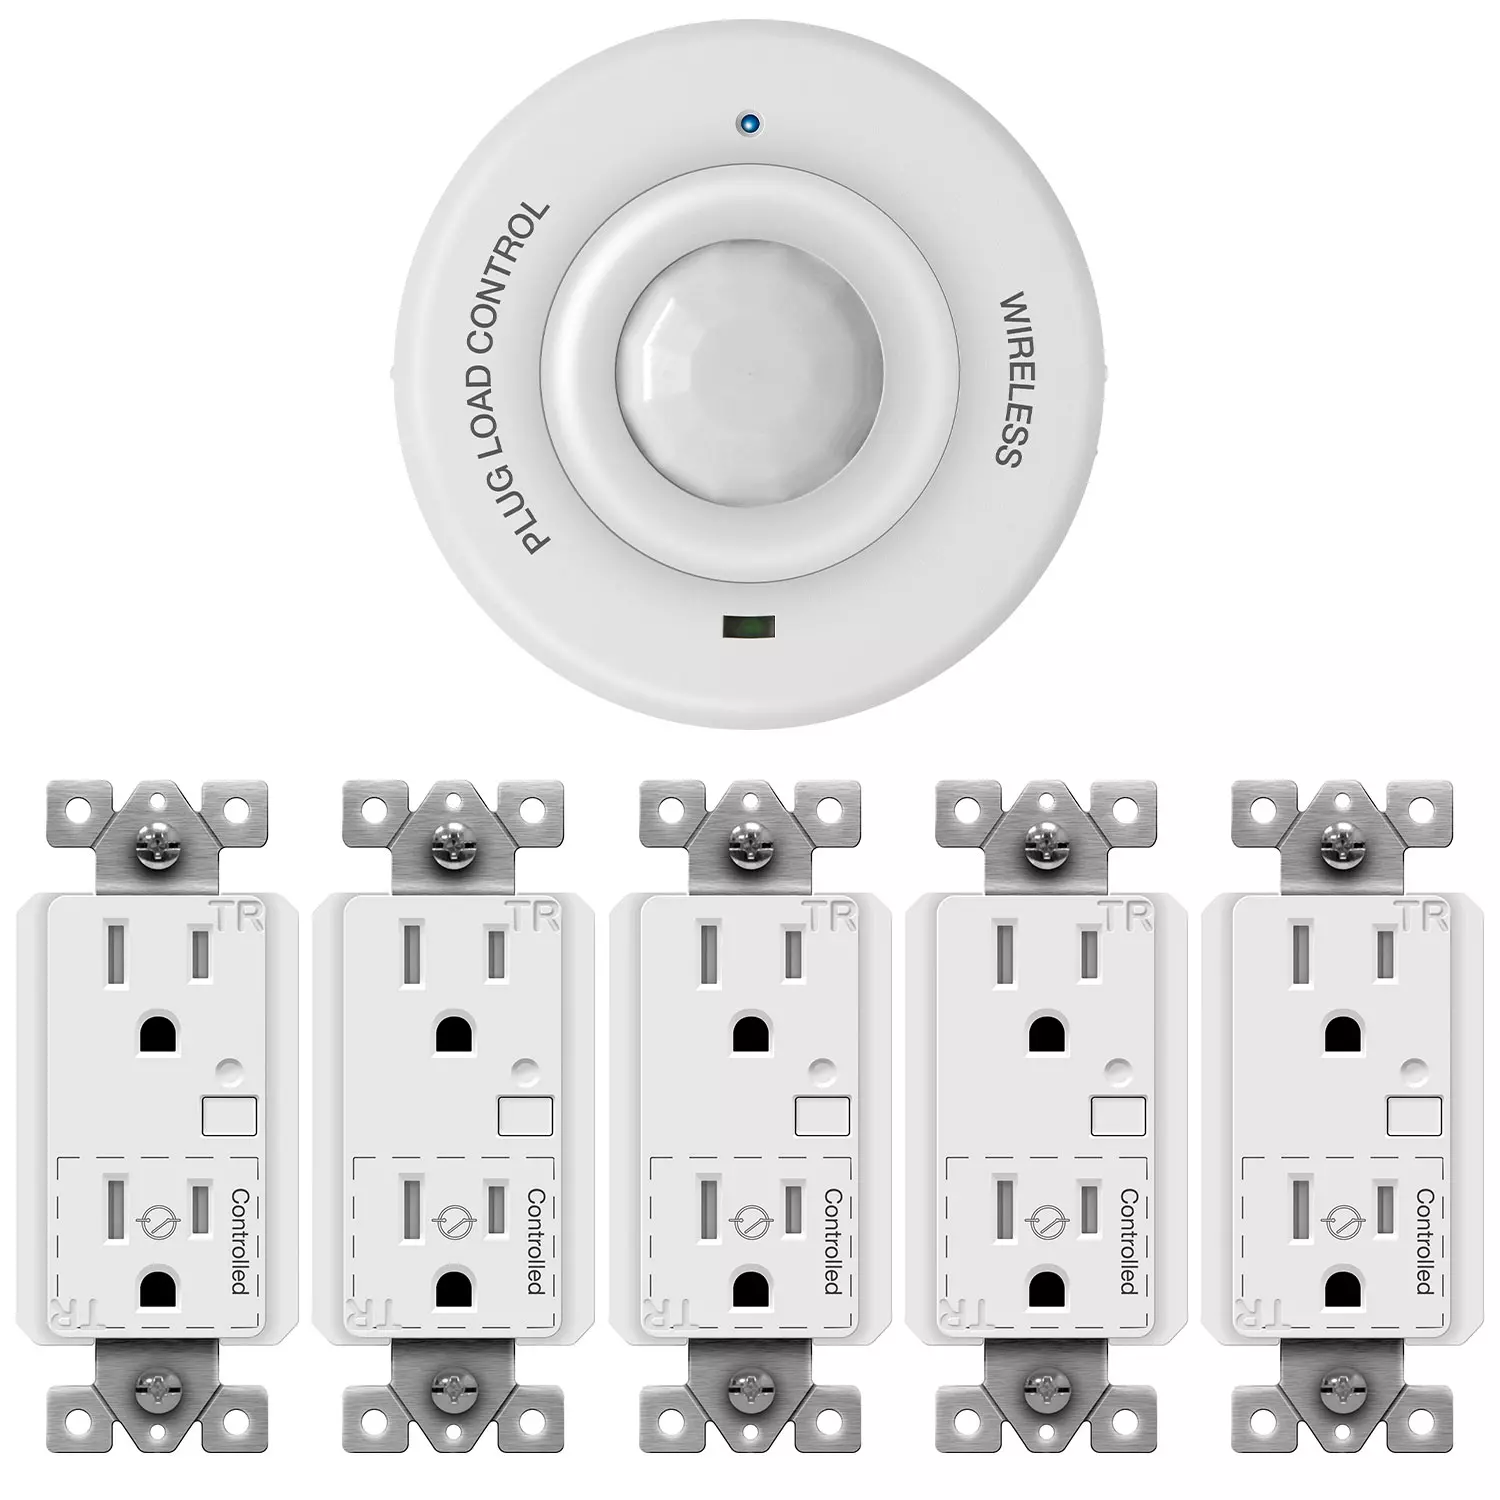 Wireless PIR Ceiling Sensor with Five 15A/125V Plug Load Control Receptacles